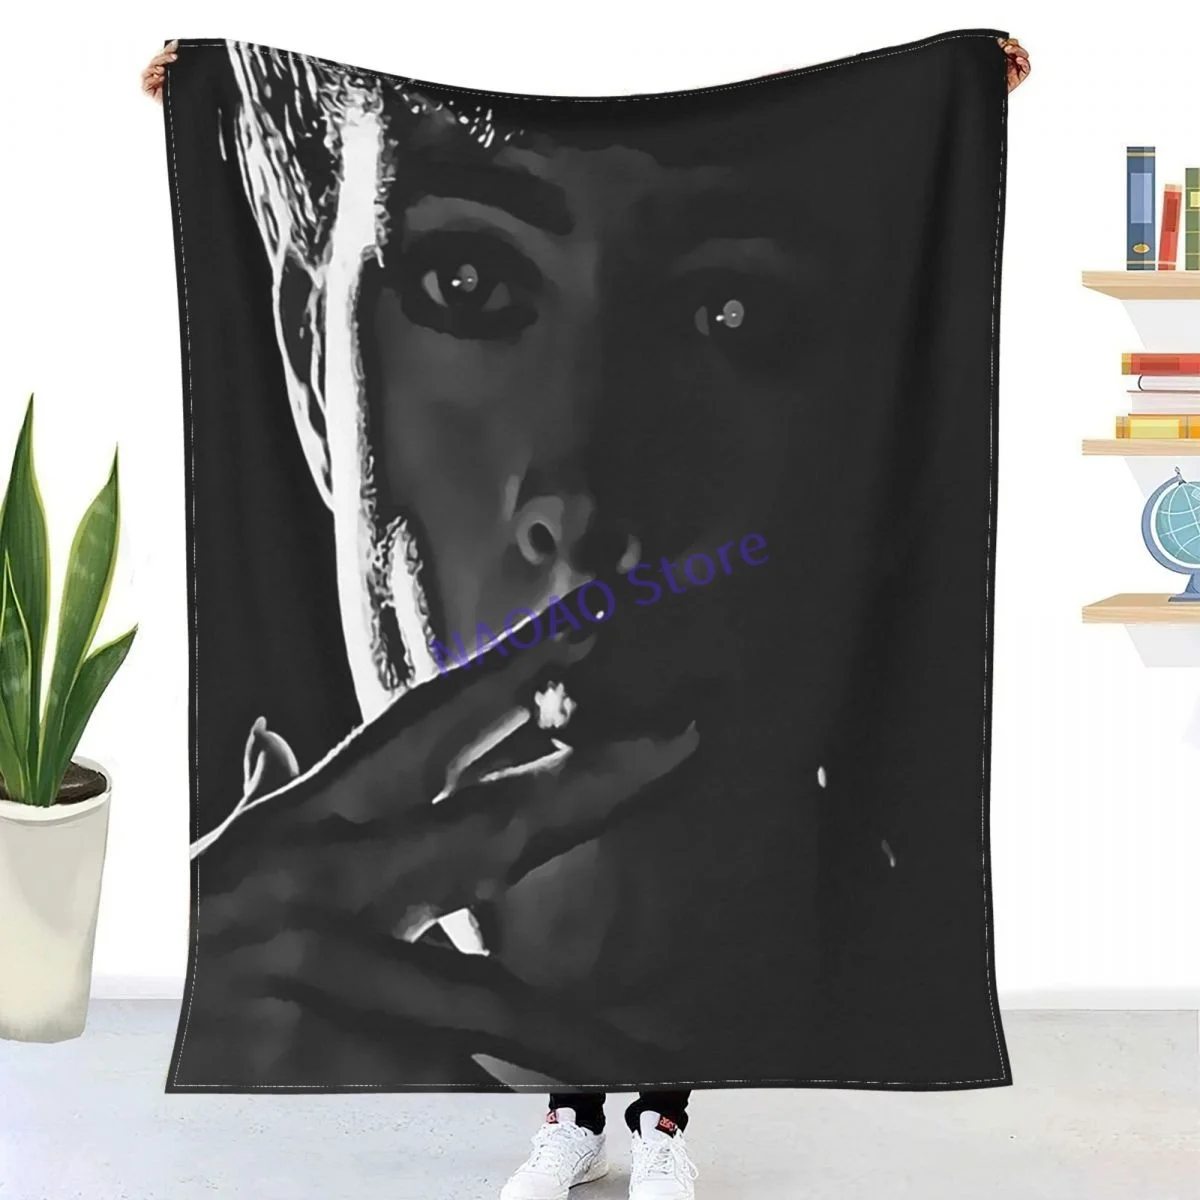 

Rachael-Replicant-Blade Runner Movie - Sci Fi - Science Fiction - 2049 - Rachel Throw Blanket Sheets On The Bed, Blanket On The